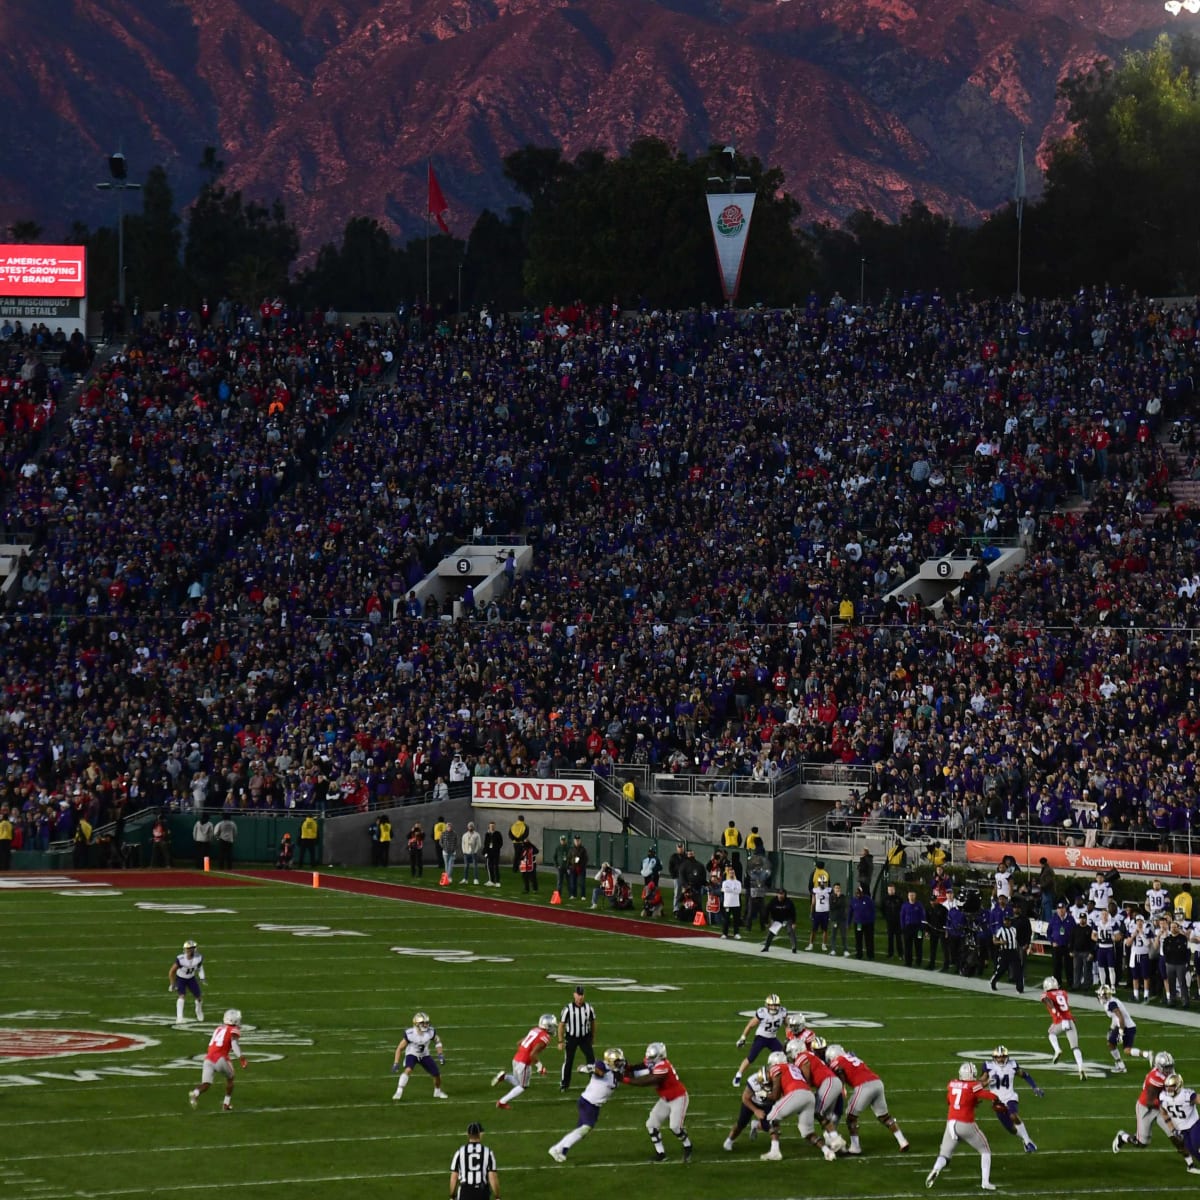 Solved: Ten major college football bowl games were played in Janua